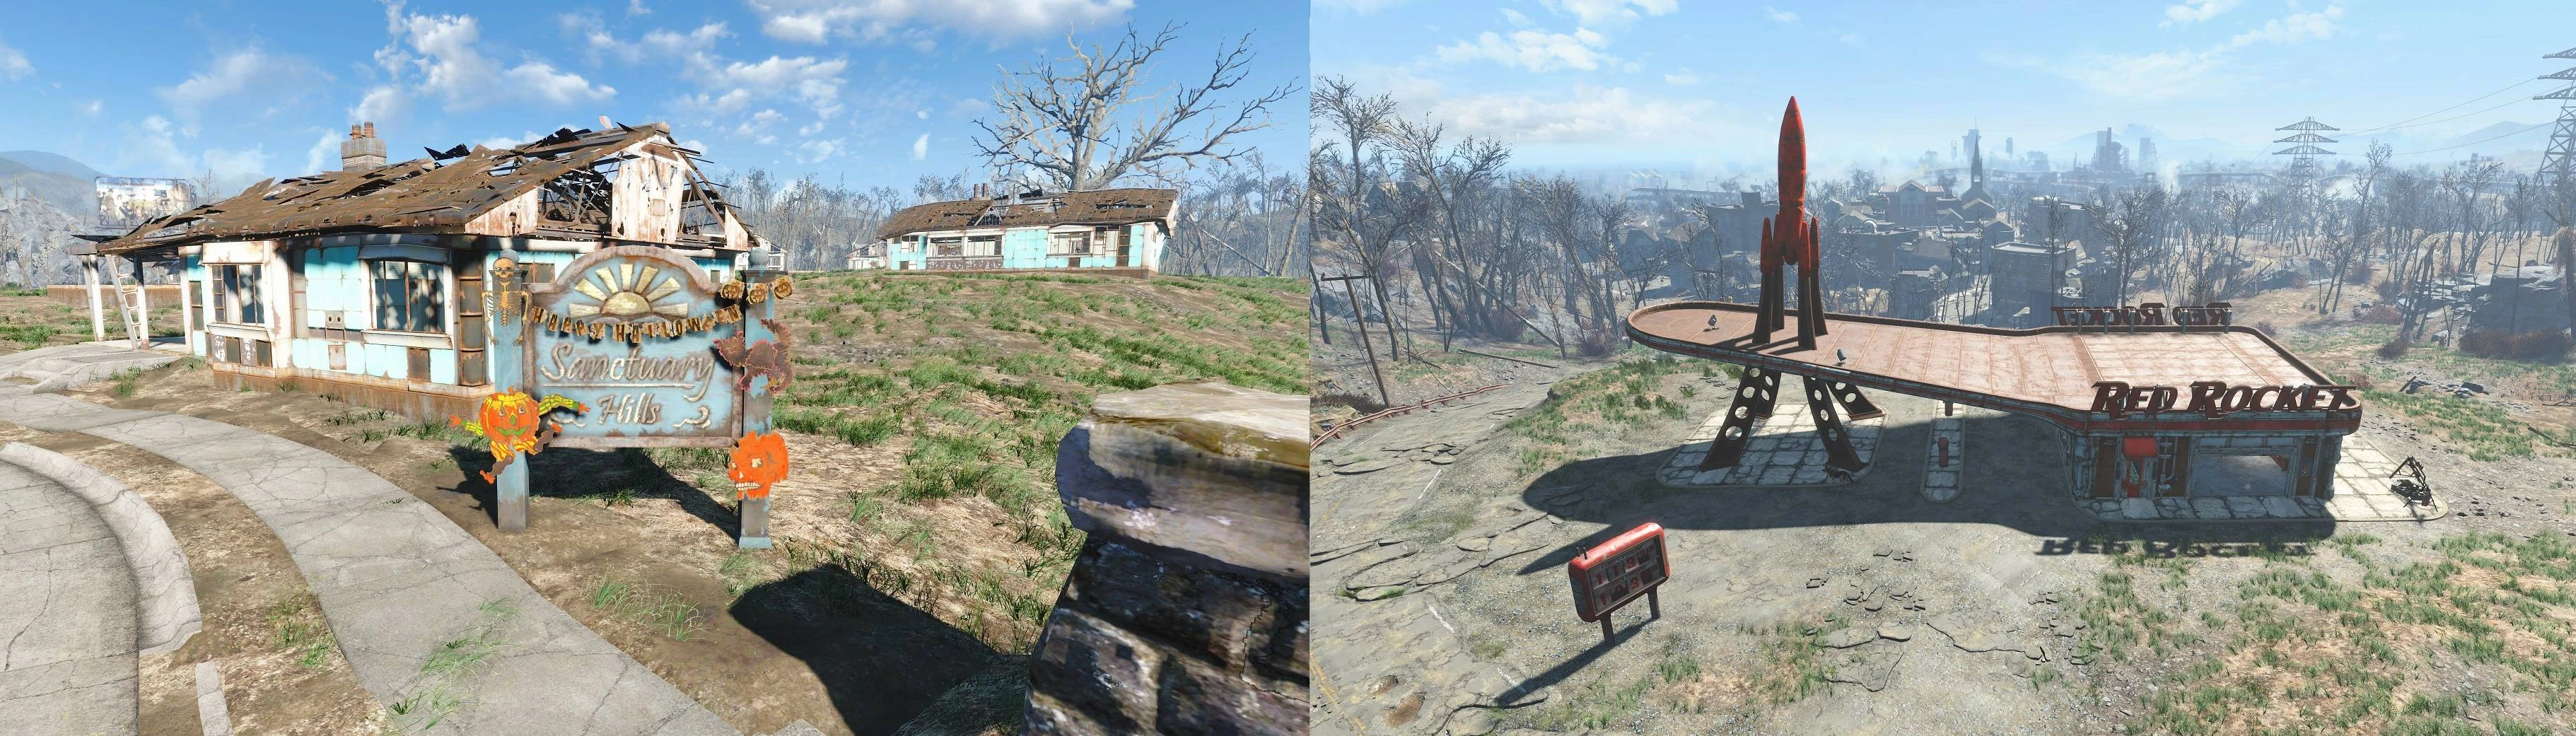 The Witcher' Invades 'Fallout 4' With Super-Realistic Mod